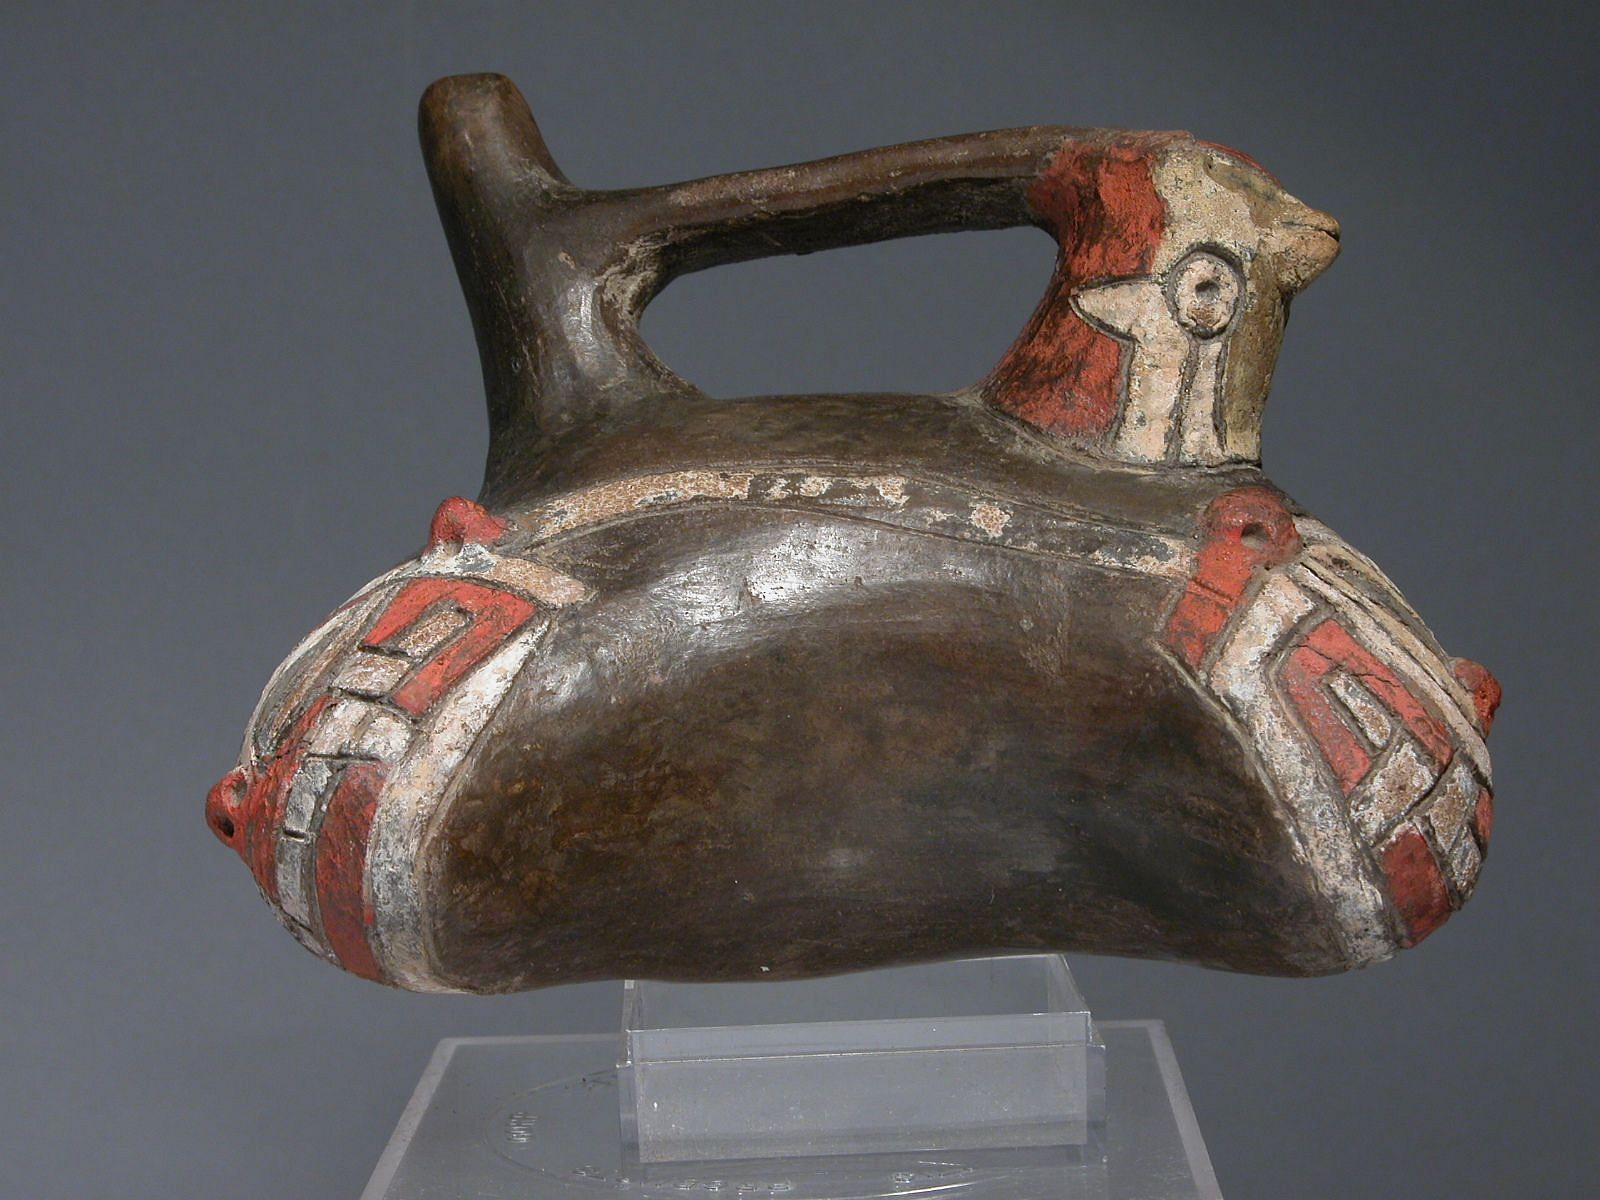 Peru, Paracas Callango Bridge Spout Effigy Vessel
This early "Callango" style vessel was painted with post-fire red and white pigments. This vessel combines two classic Andean elements: the eared falcon and the double-headed serpent.   The bridge has a blind spout decorated with an eared falcon, while the body represents the double-headed Rainbow Serpent, a key figure in Andean cosmology. The double-head serpent motif originated during the Chavin period, and likely represents the Amphisbaena fuligoninos – a snake that appears to have two heads  to intimidate predators. Both the eared falcon ad the double-headed snake motifs are illustrated in Christopher Donnan’s, "Ancient Peruvian Ceramics" in plates 51 and 2.  Acquired from Christie’s in 1998, previously in an old estate prior to 1970. Period: Peru, Paracas, Early Phase, South Coast, c. 900 - 600 BC
Media: Ceramic
Dimensions: Length: 5 1/2 x Height: 4"
$4,750
98429b